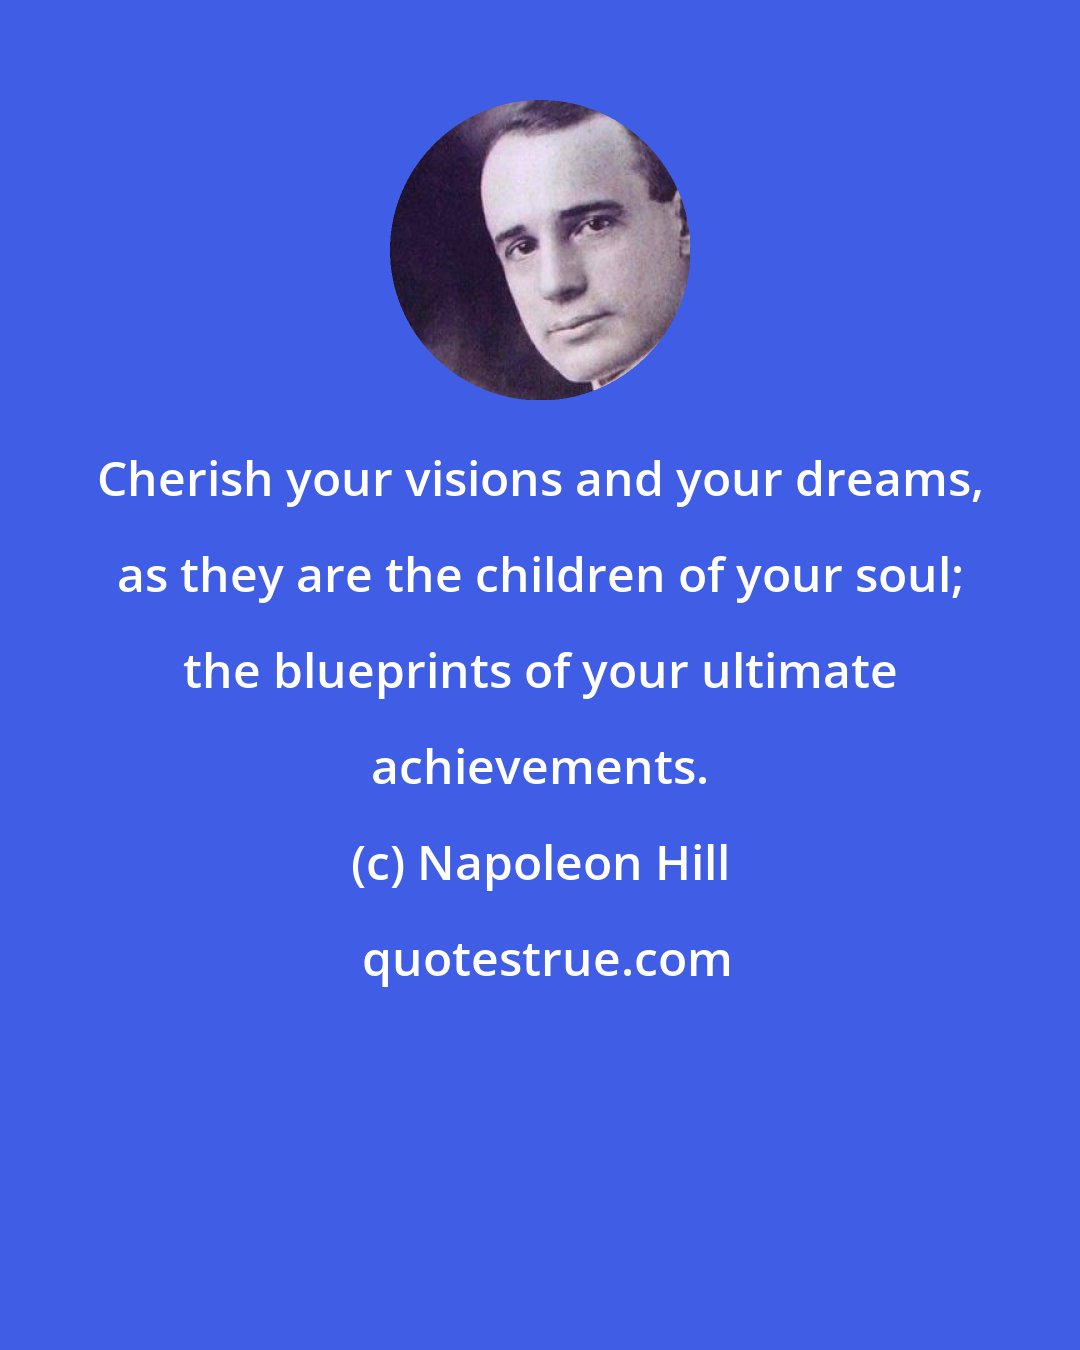 Napoleon Hill: Cherish your visions and your dreams, as they are the children of your soul; the blueprints of your ultimate achievements.